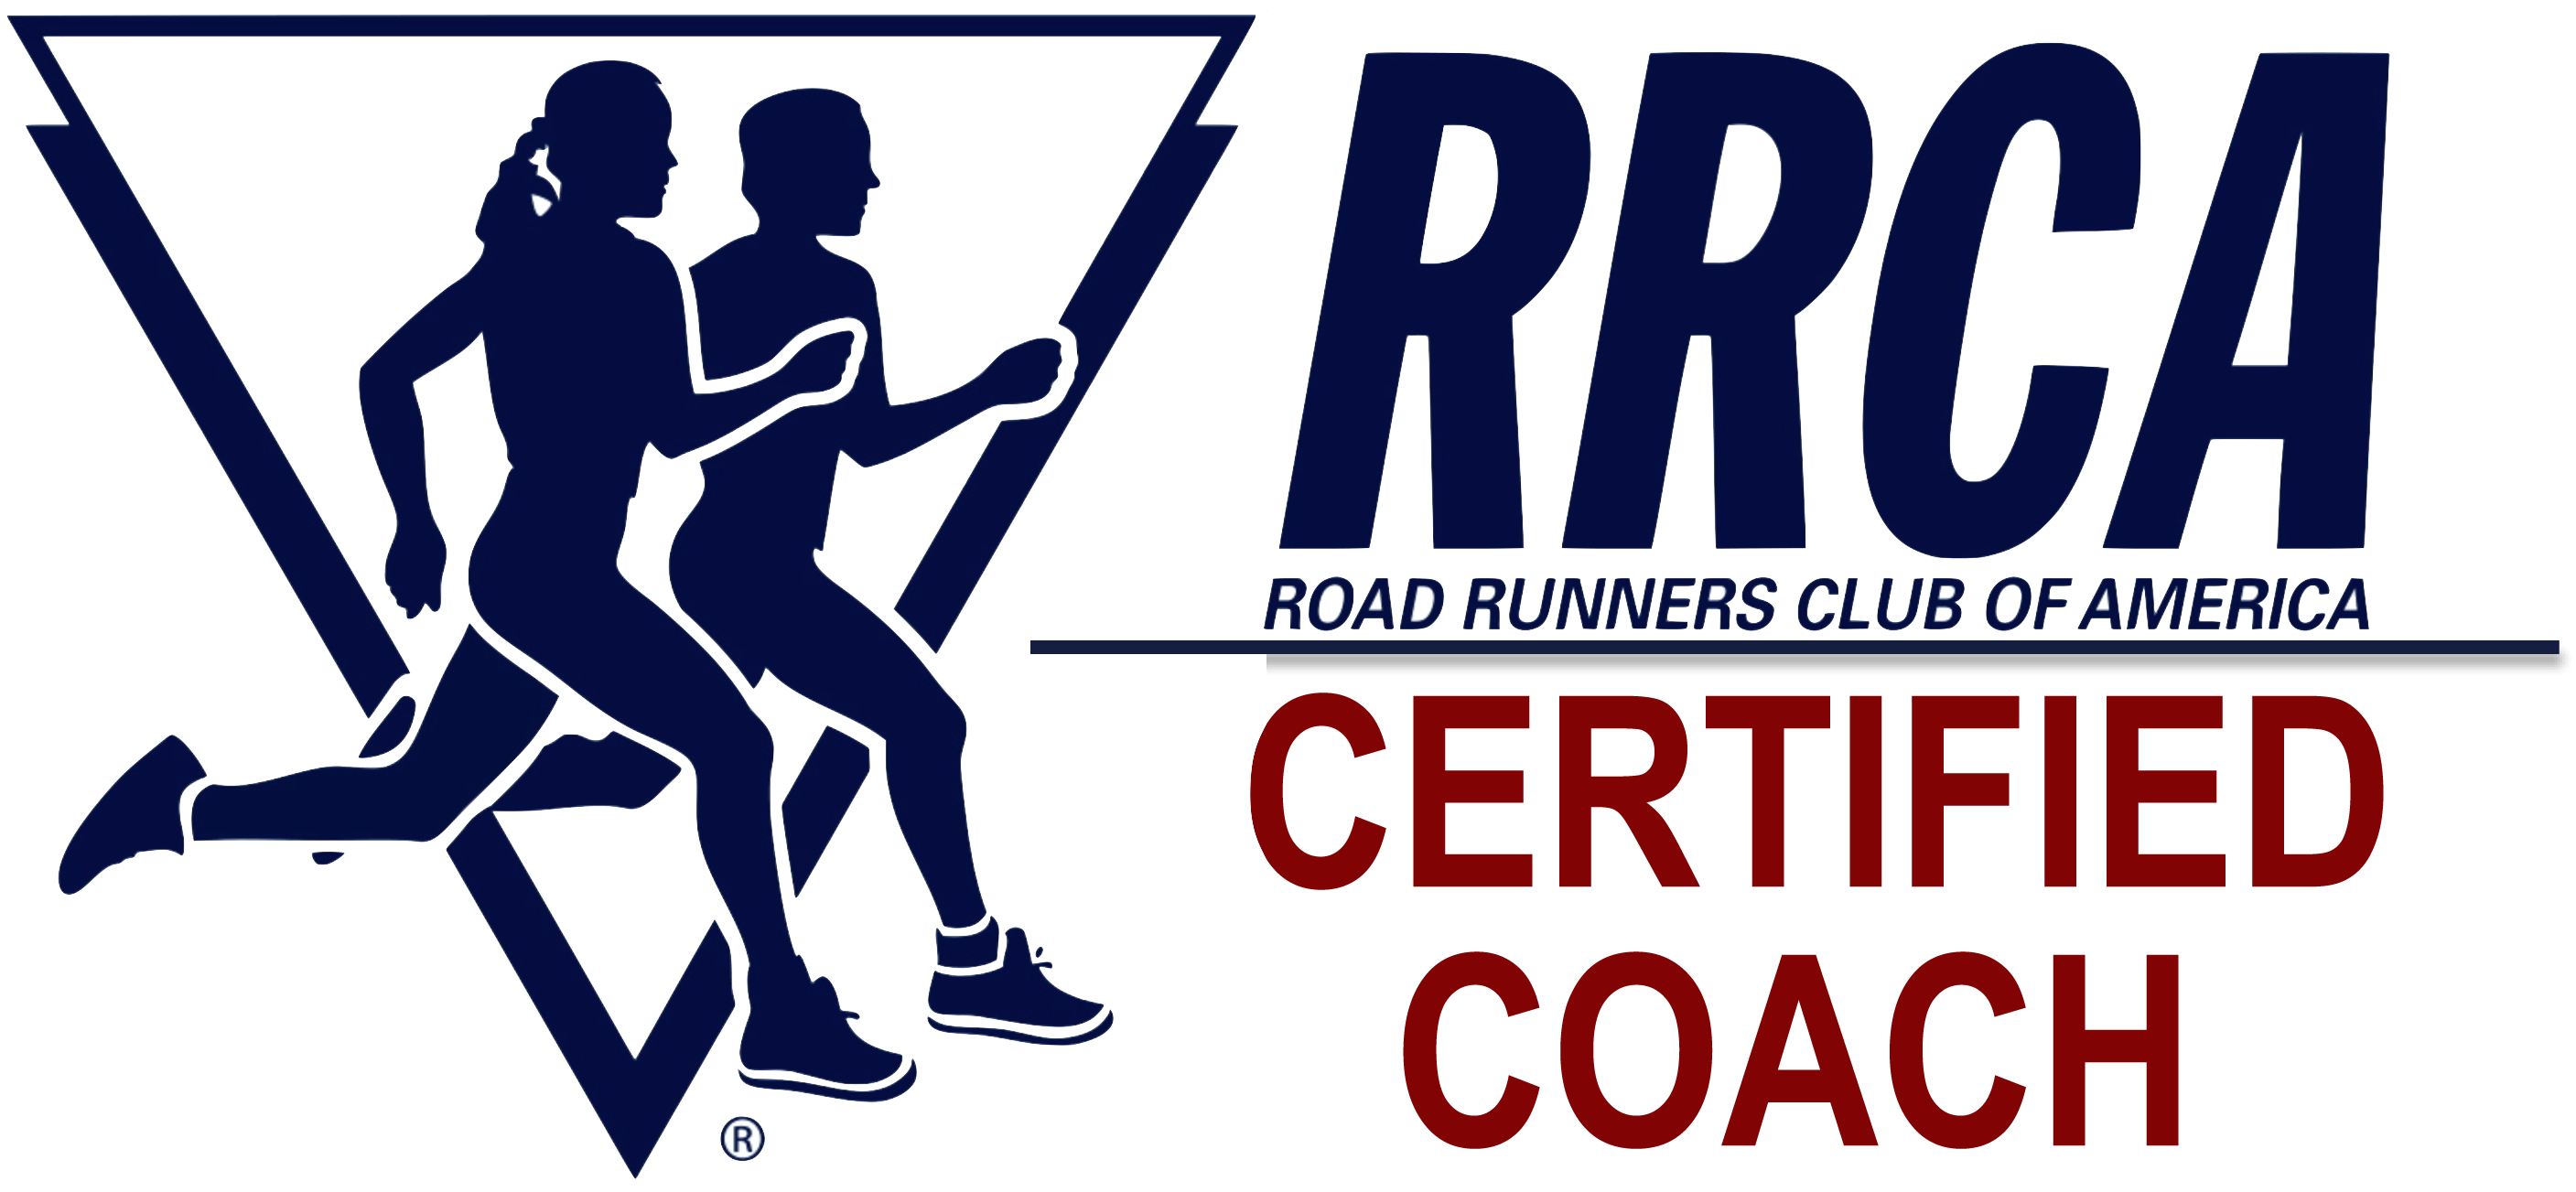 Coaches Logo - For Certified Coaches Only